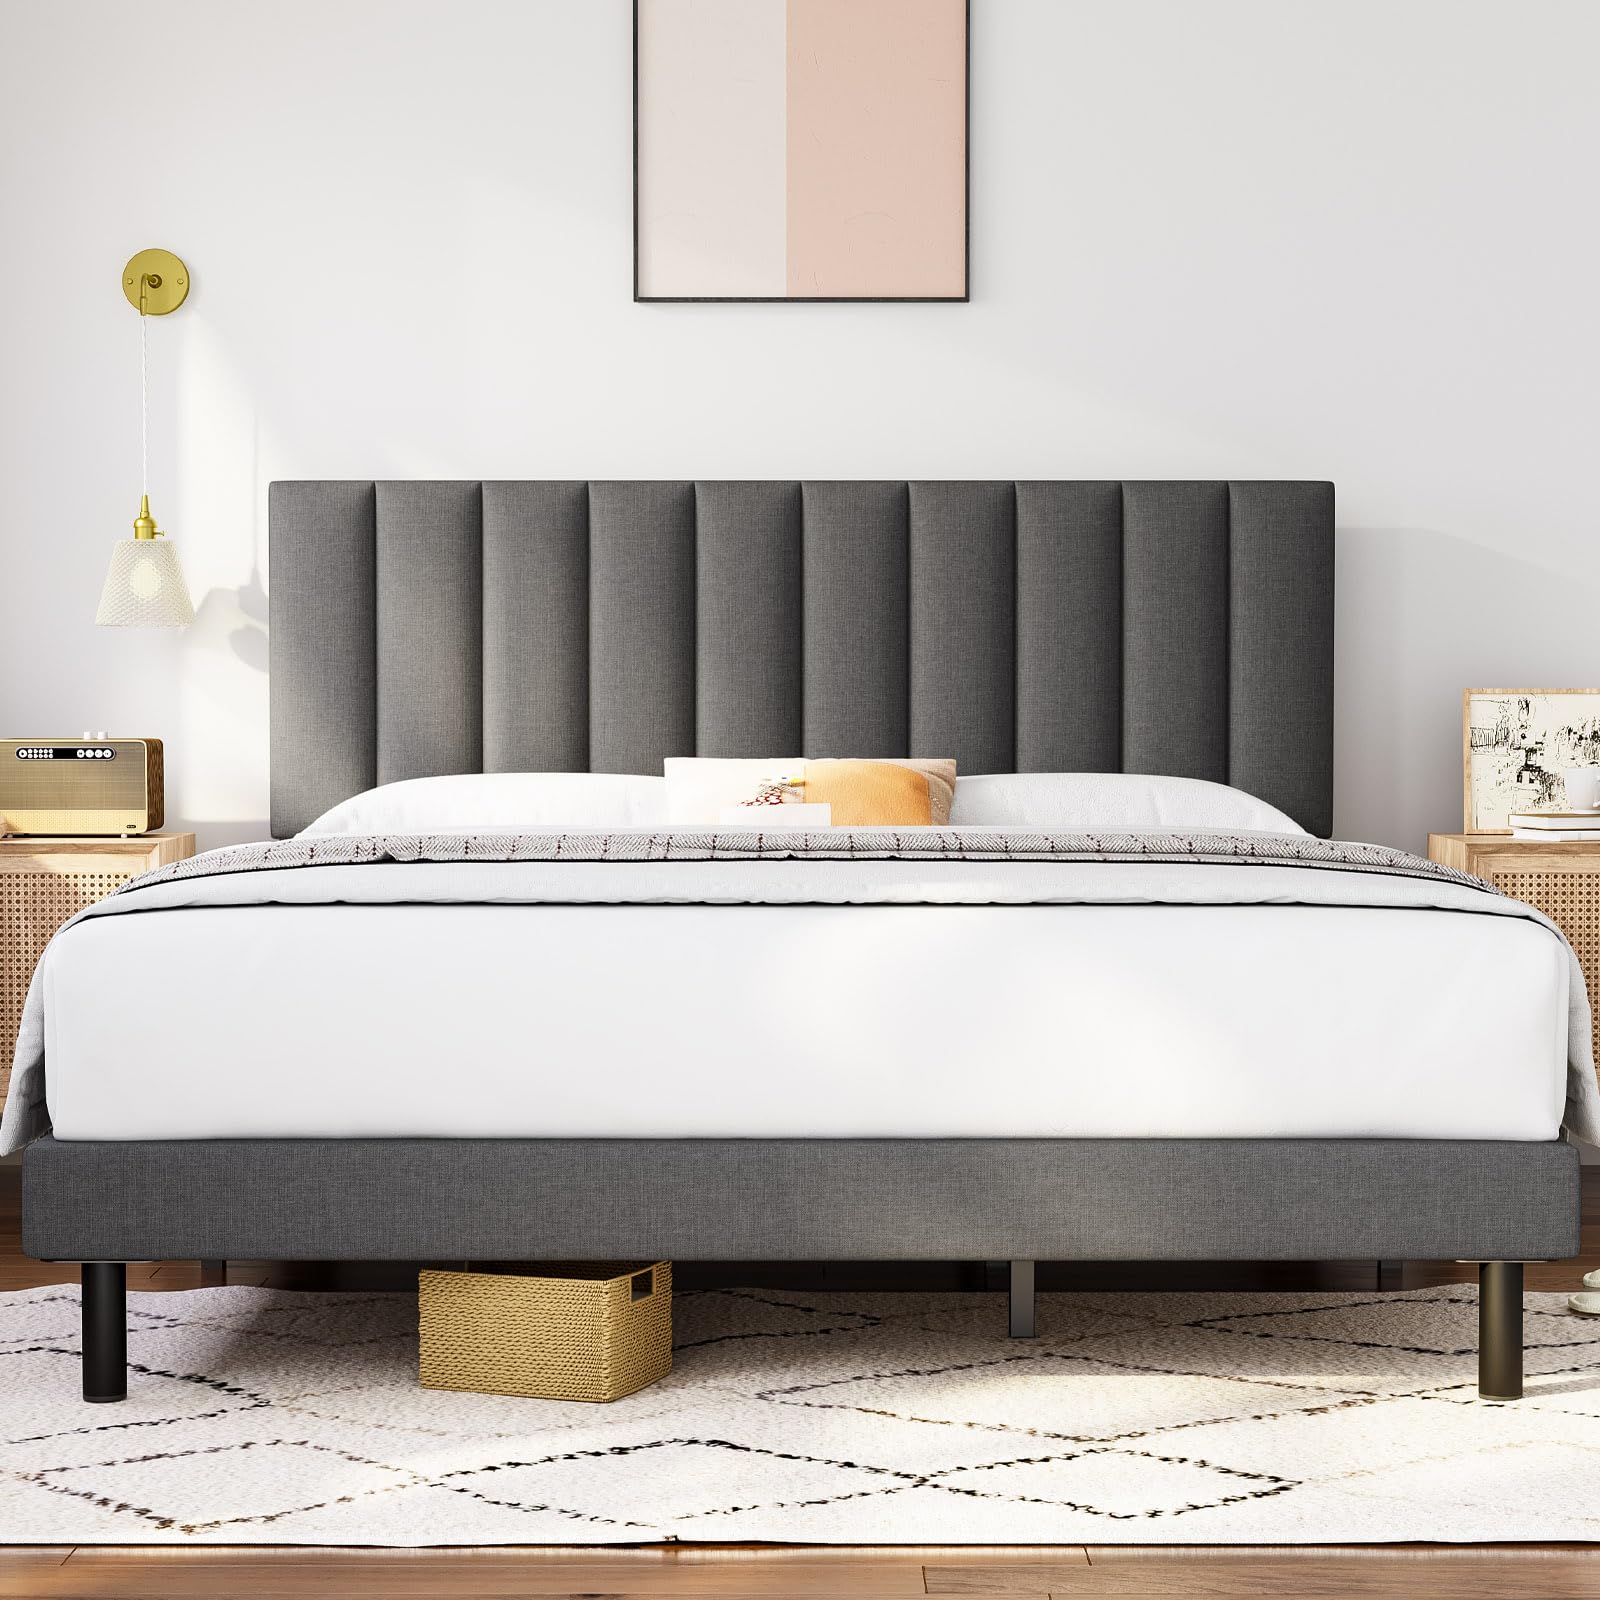 Top King Bed Frame Picks to Support Your Sleep in Style插图4